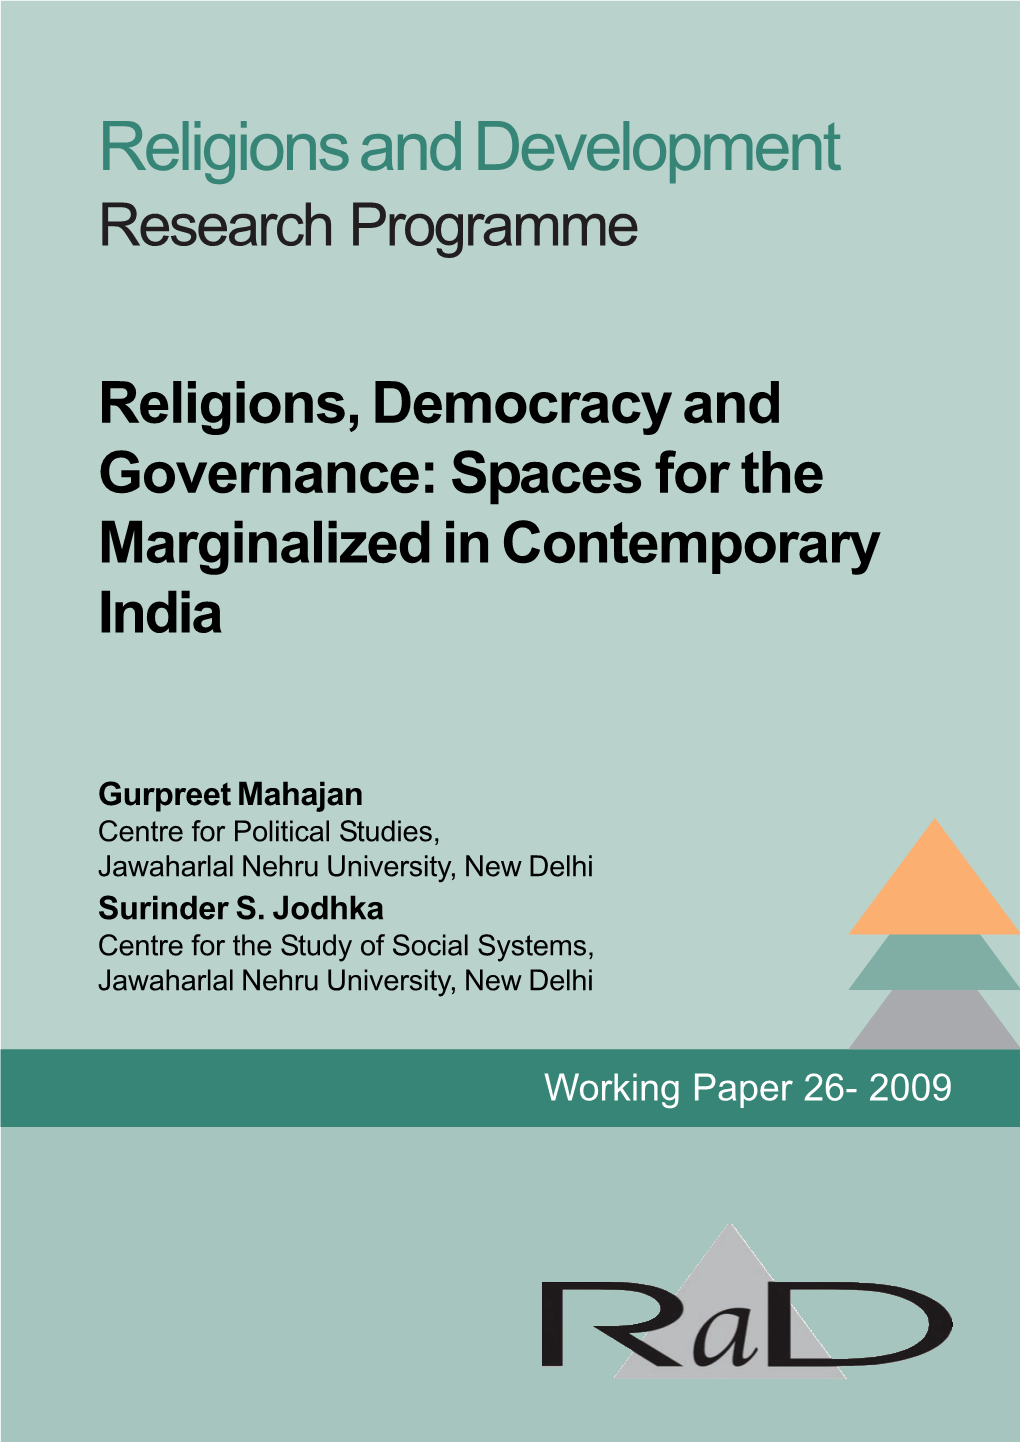 Religions and Development Research Programme